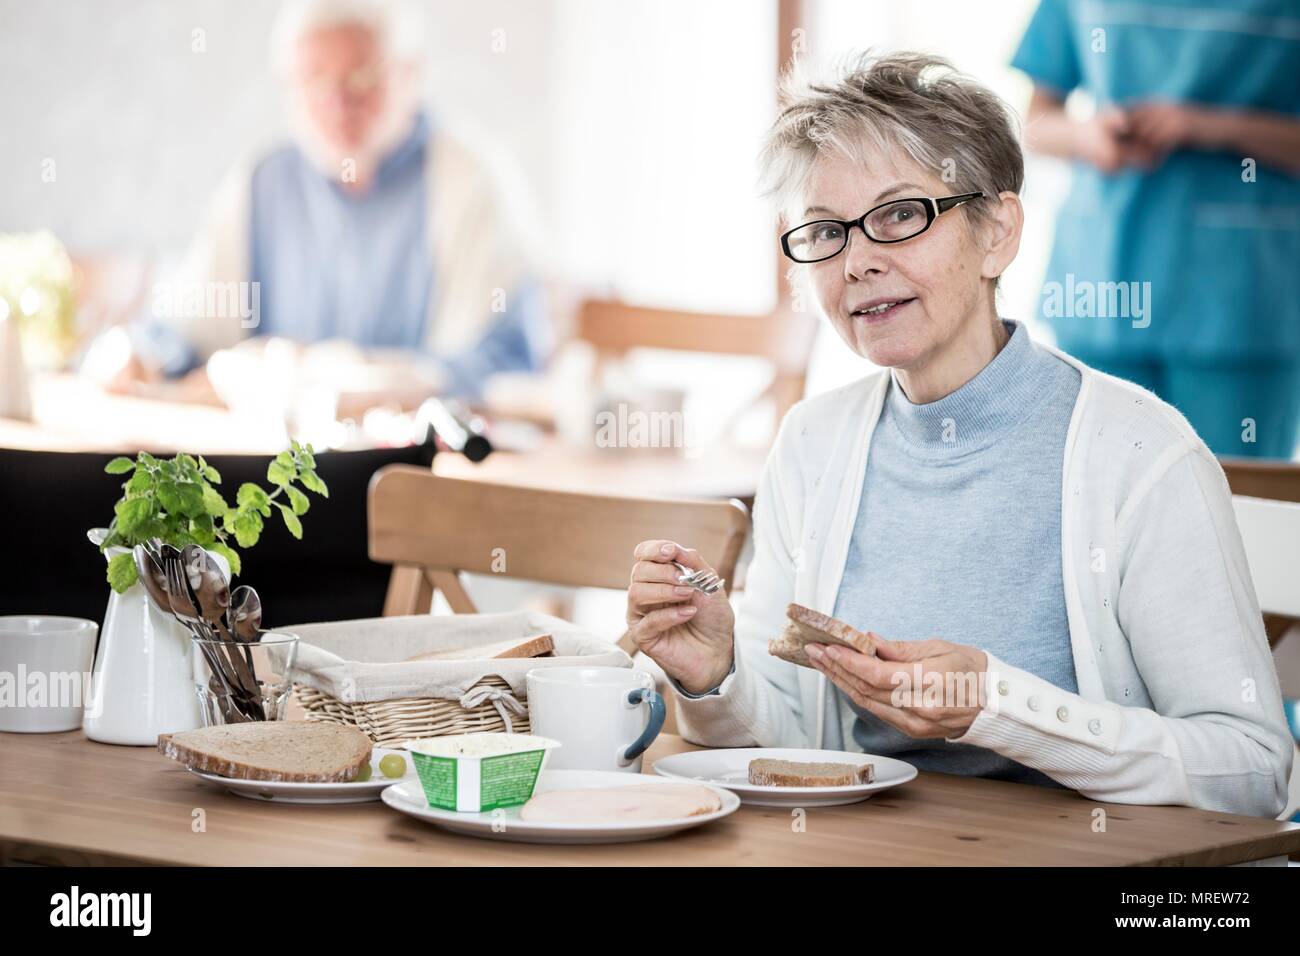 Senior woman eating meal in care home. Stock Photo